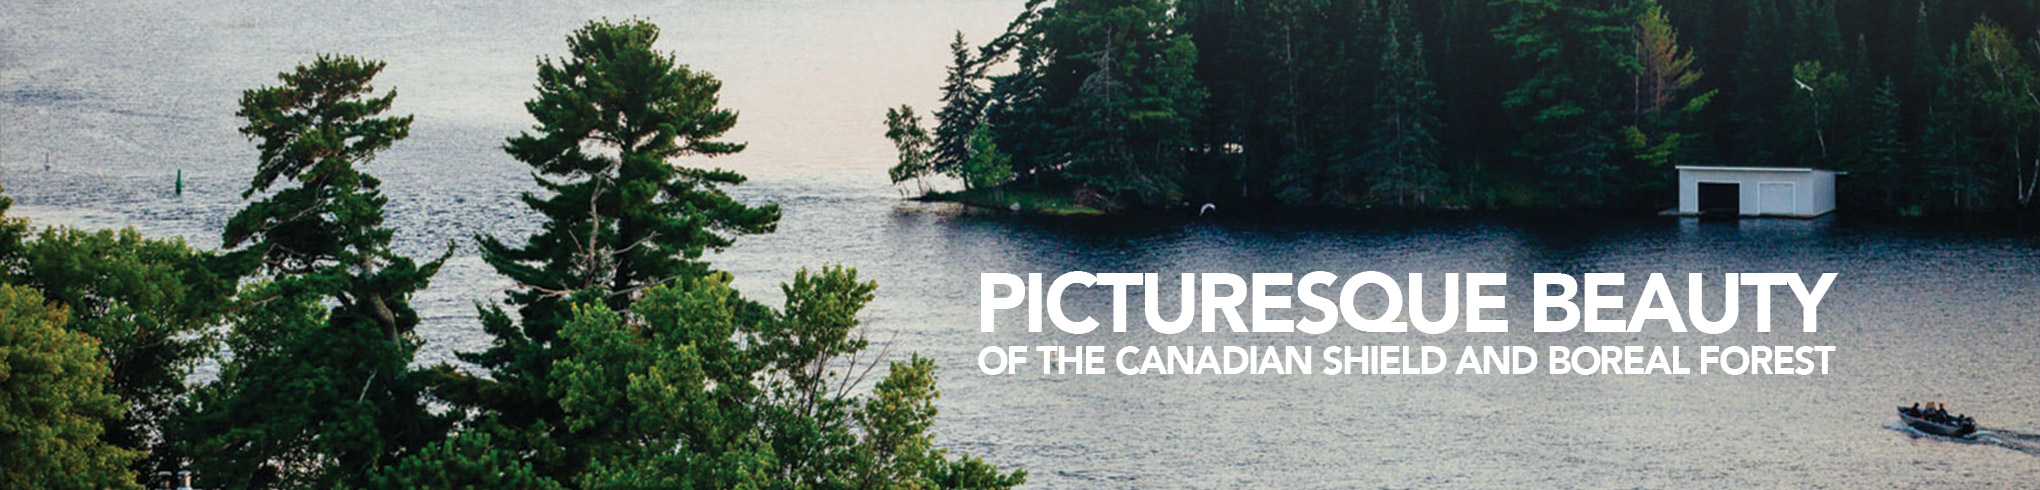 Picturesque Beauty of the Canadian Shield and Boreal Forest